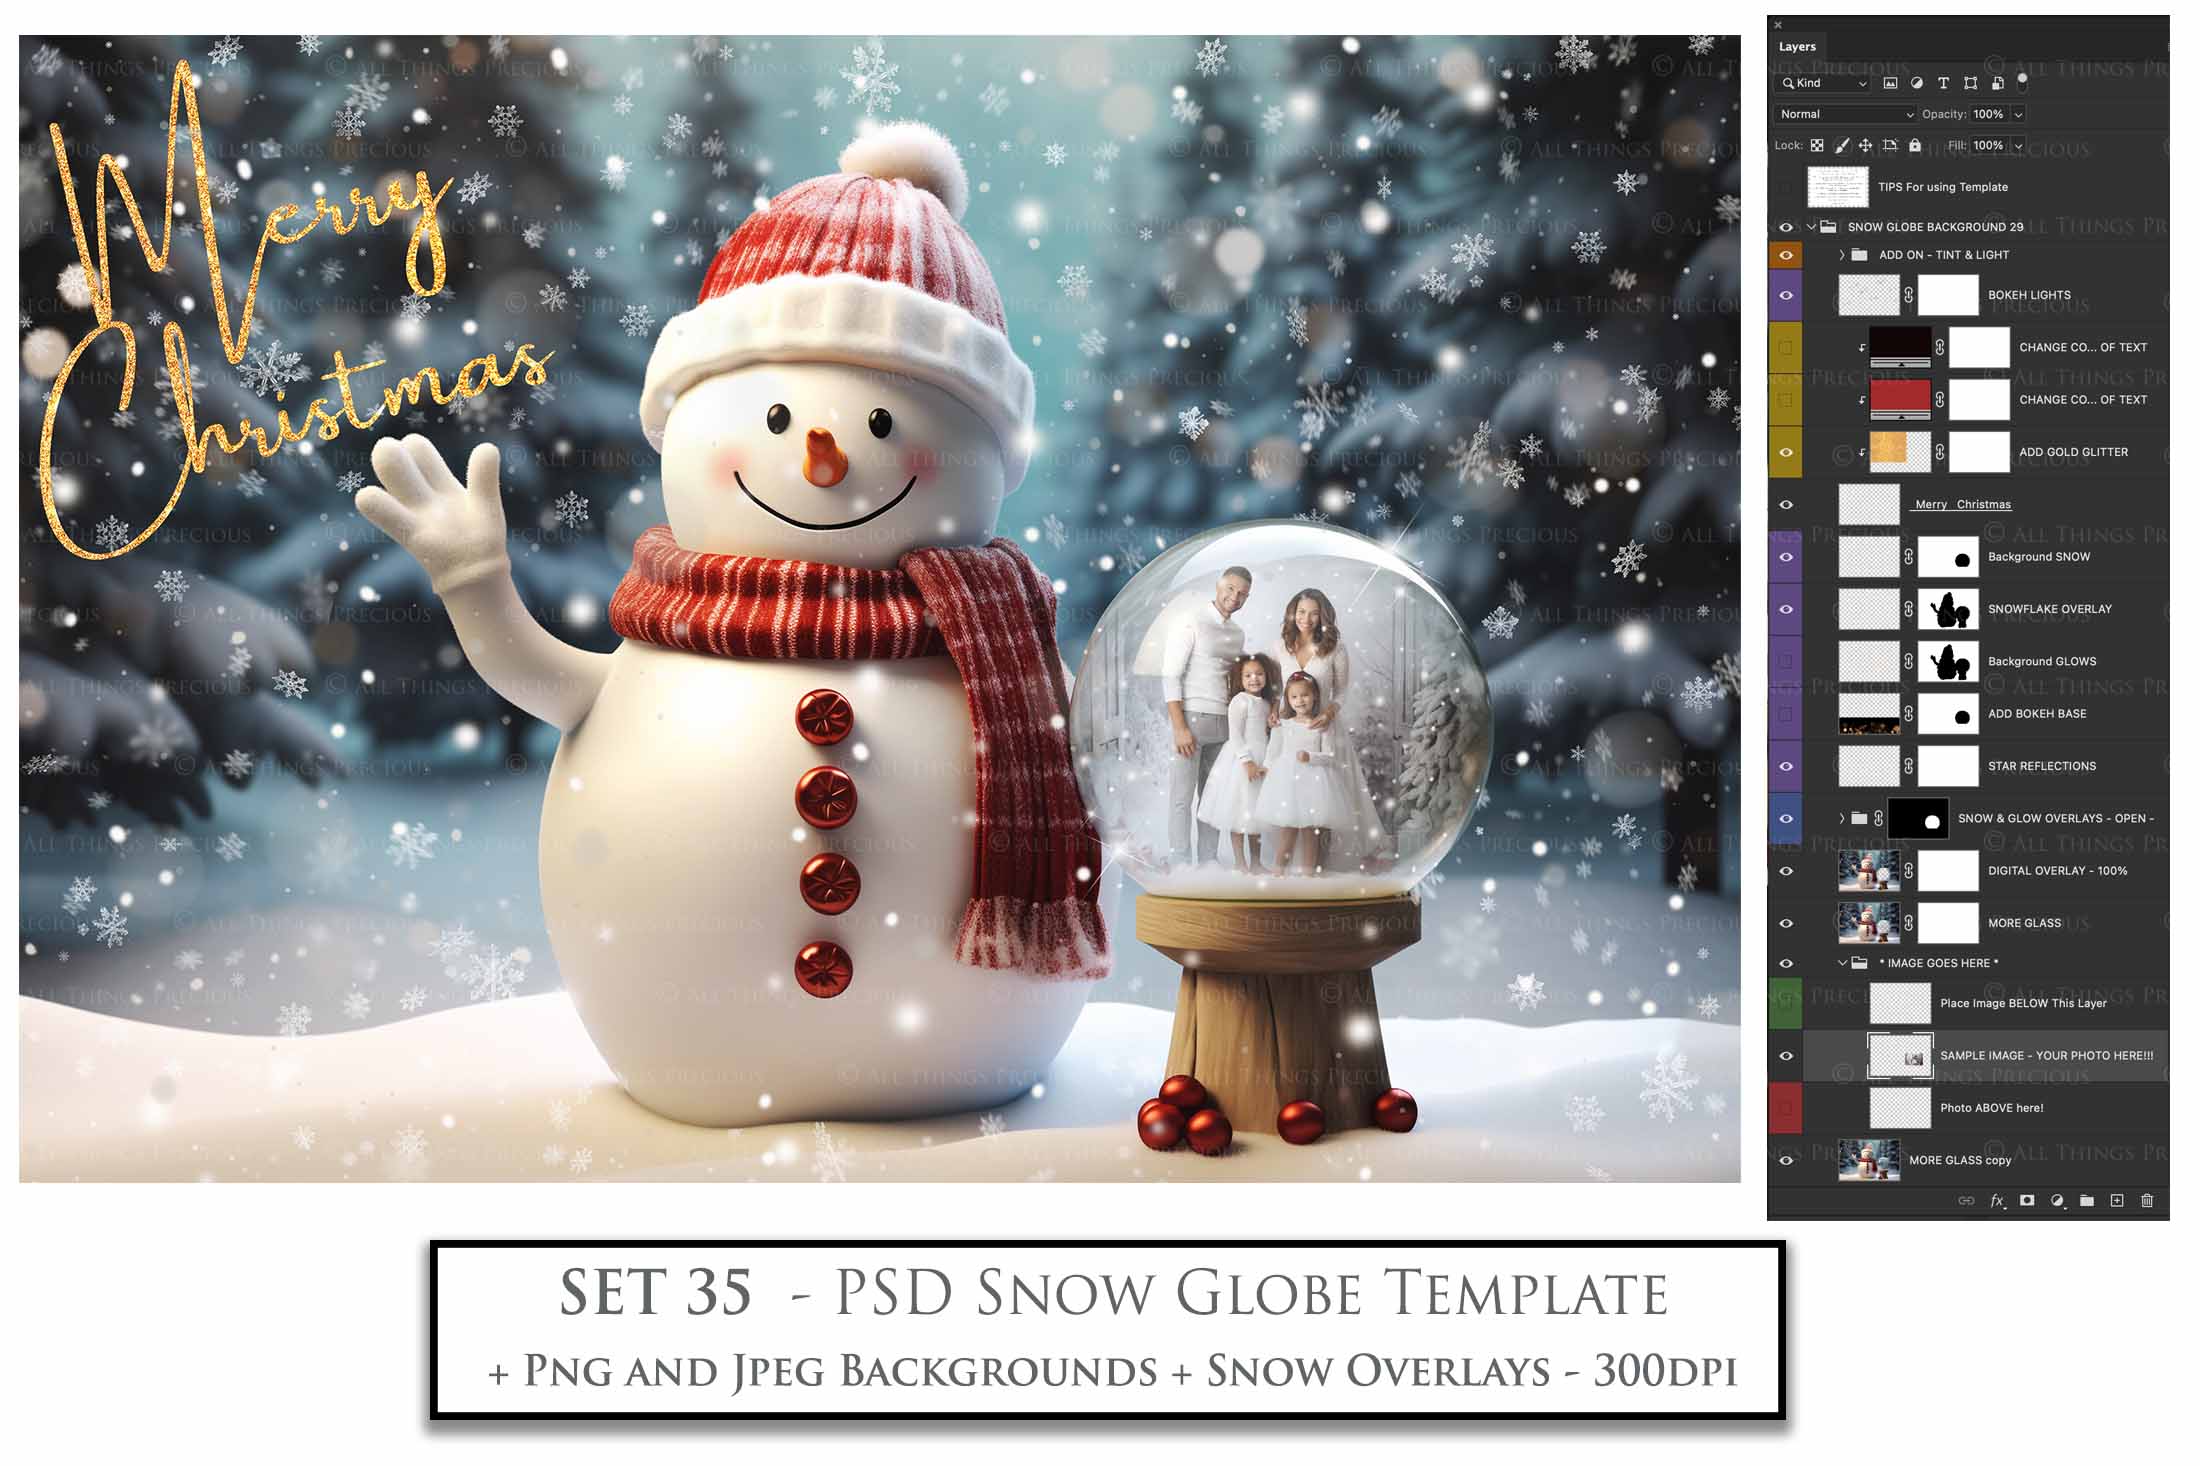 Digital Snow Globe Background, with Png snow overlays & PSD Template. The globe is transparent, perfect for adding your own images and retain the glass  effect.The file is 6000 x 4000, 300dpi. Png Included. Use for Christmas edits, Photography, Card Crafts, Scrapbooking. Xmas Backdrops. Snowman holding a glass ball.